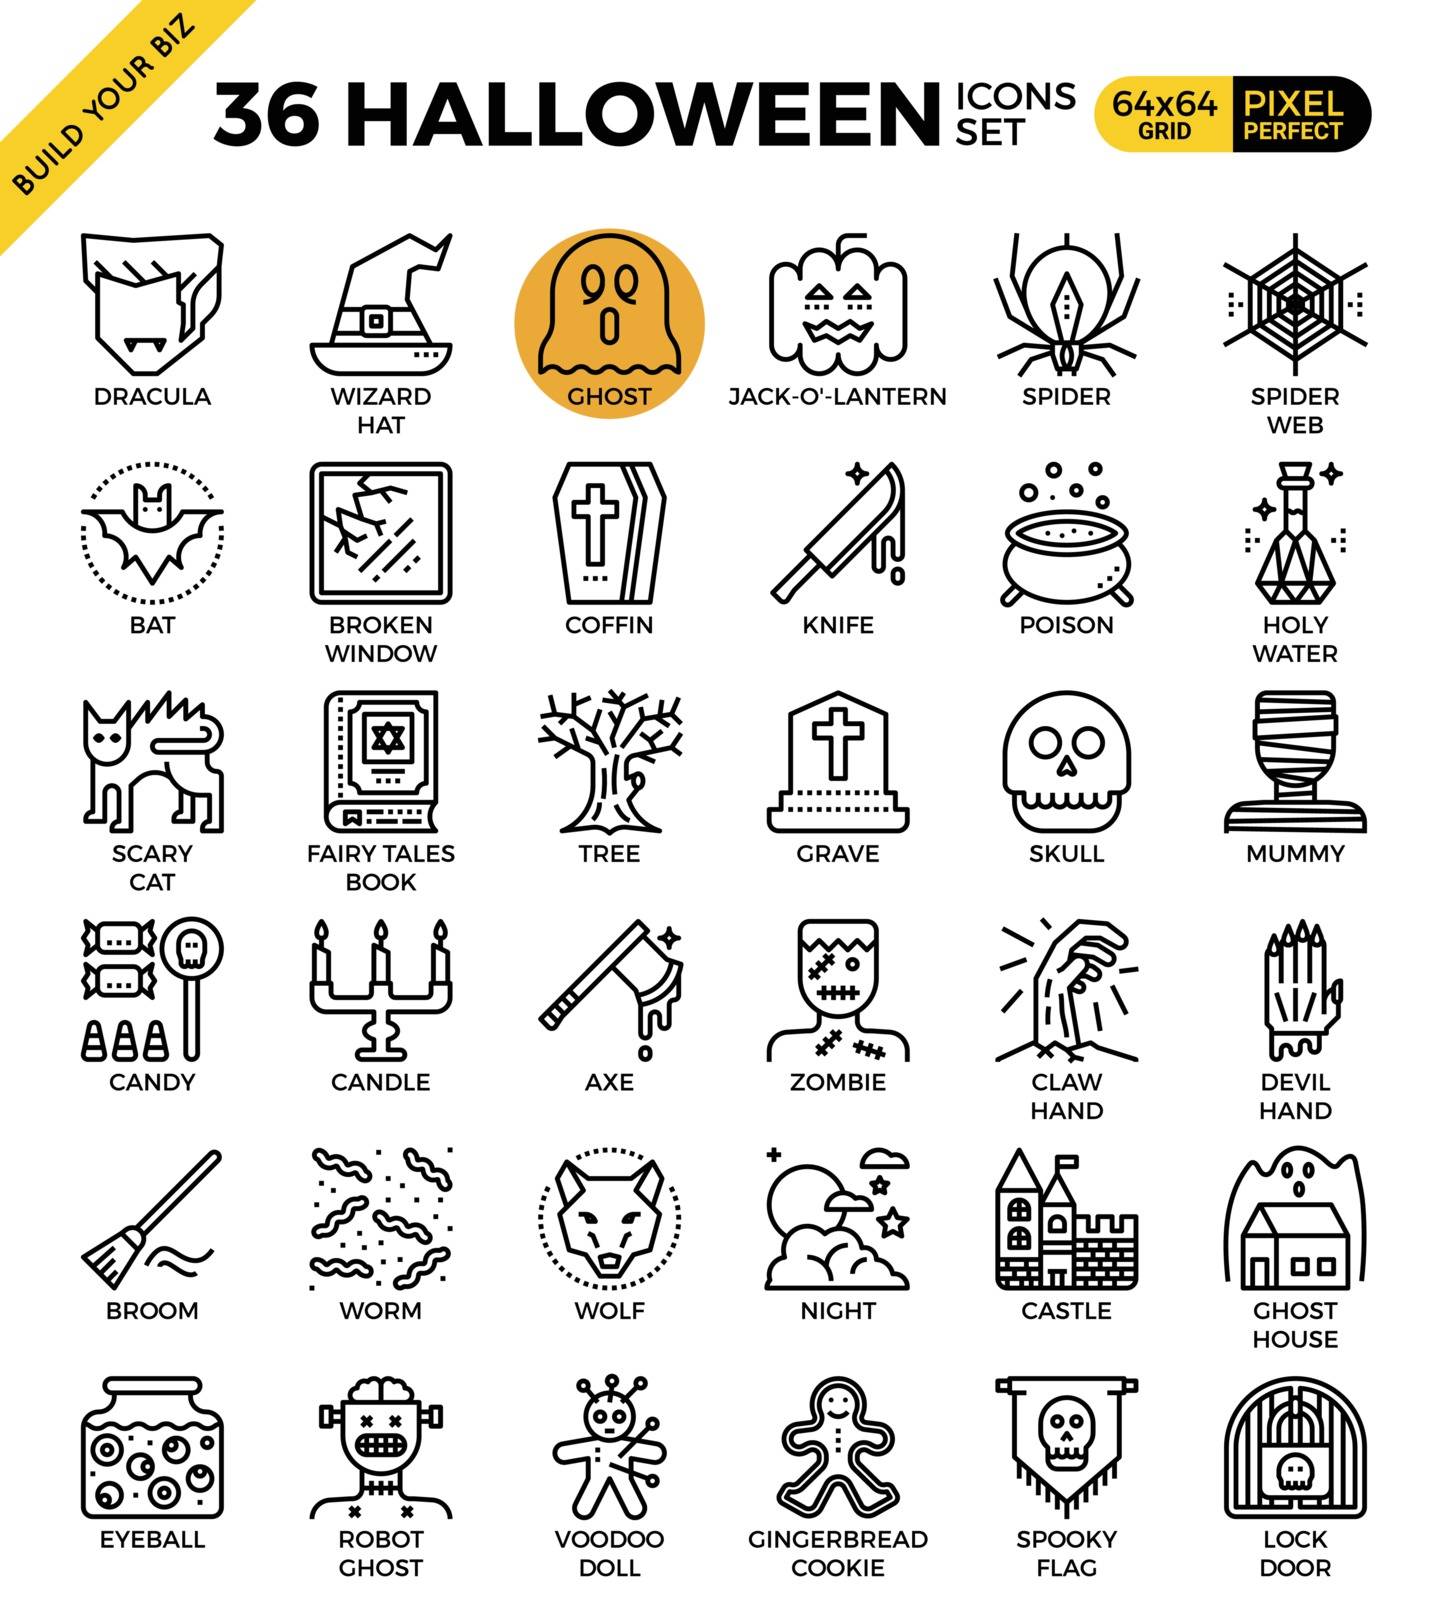 Spooky halloween outline icons modern style for website or print illustration